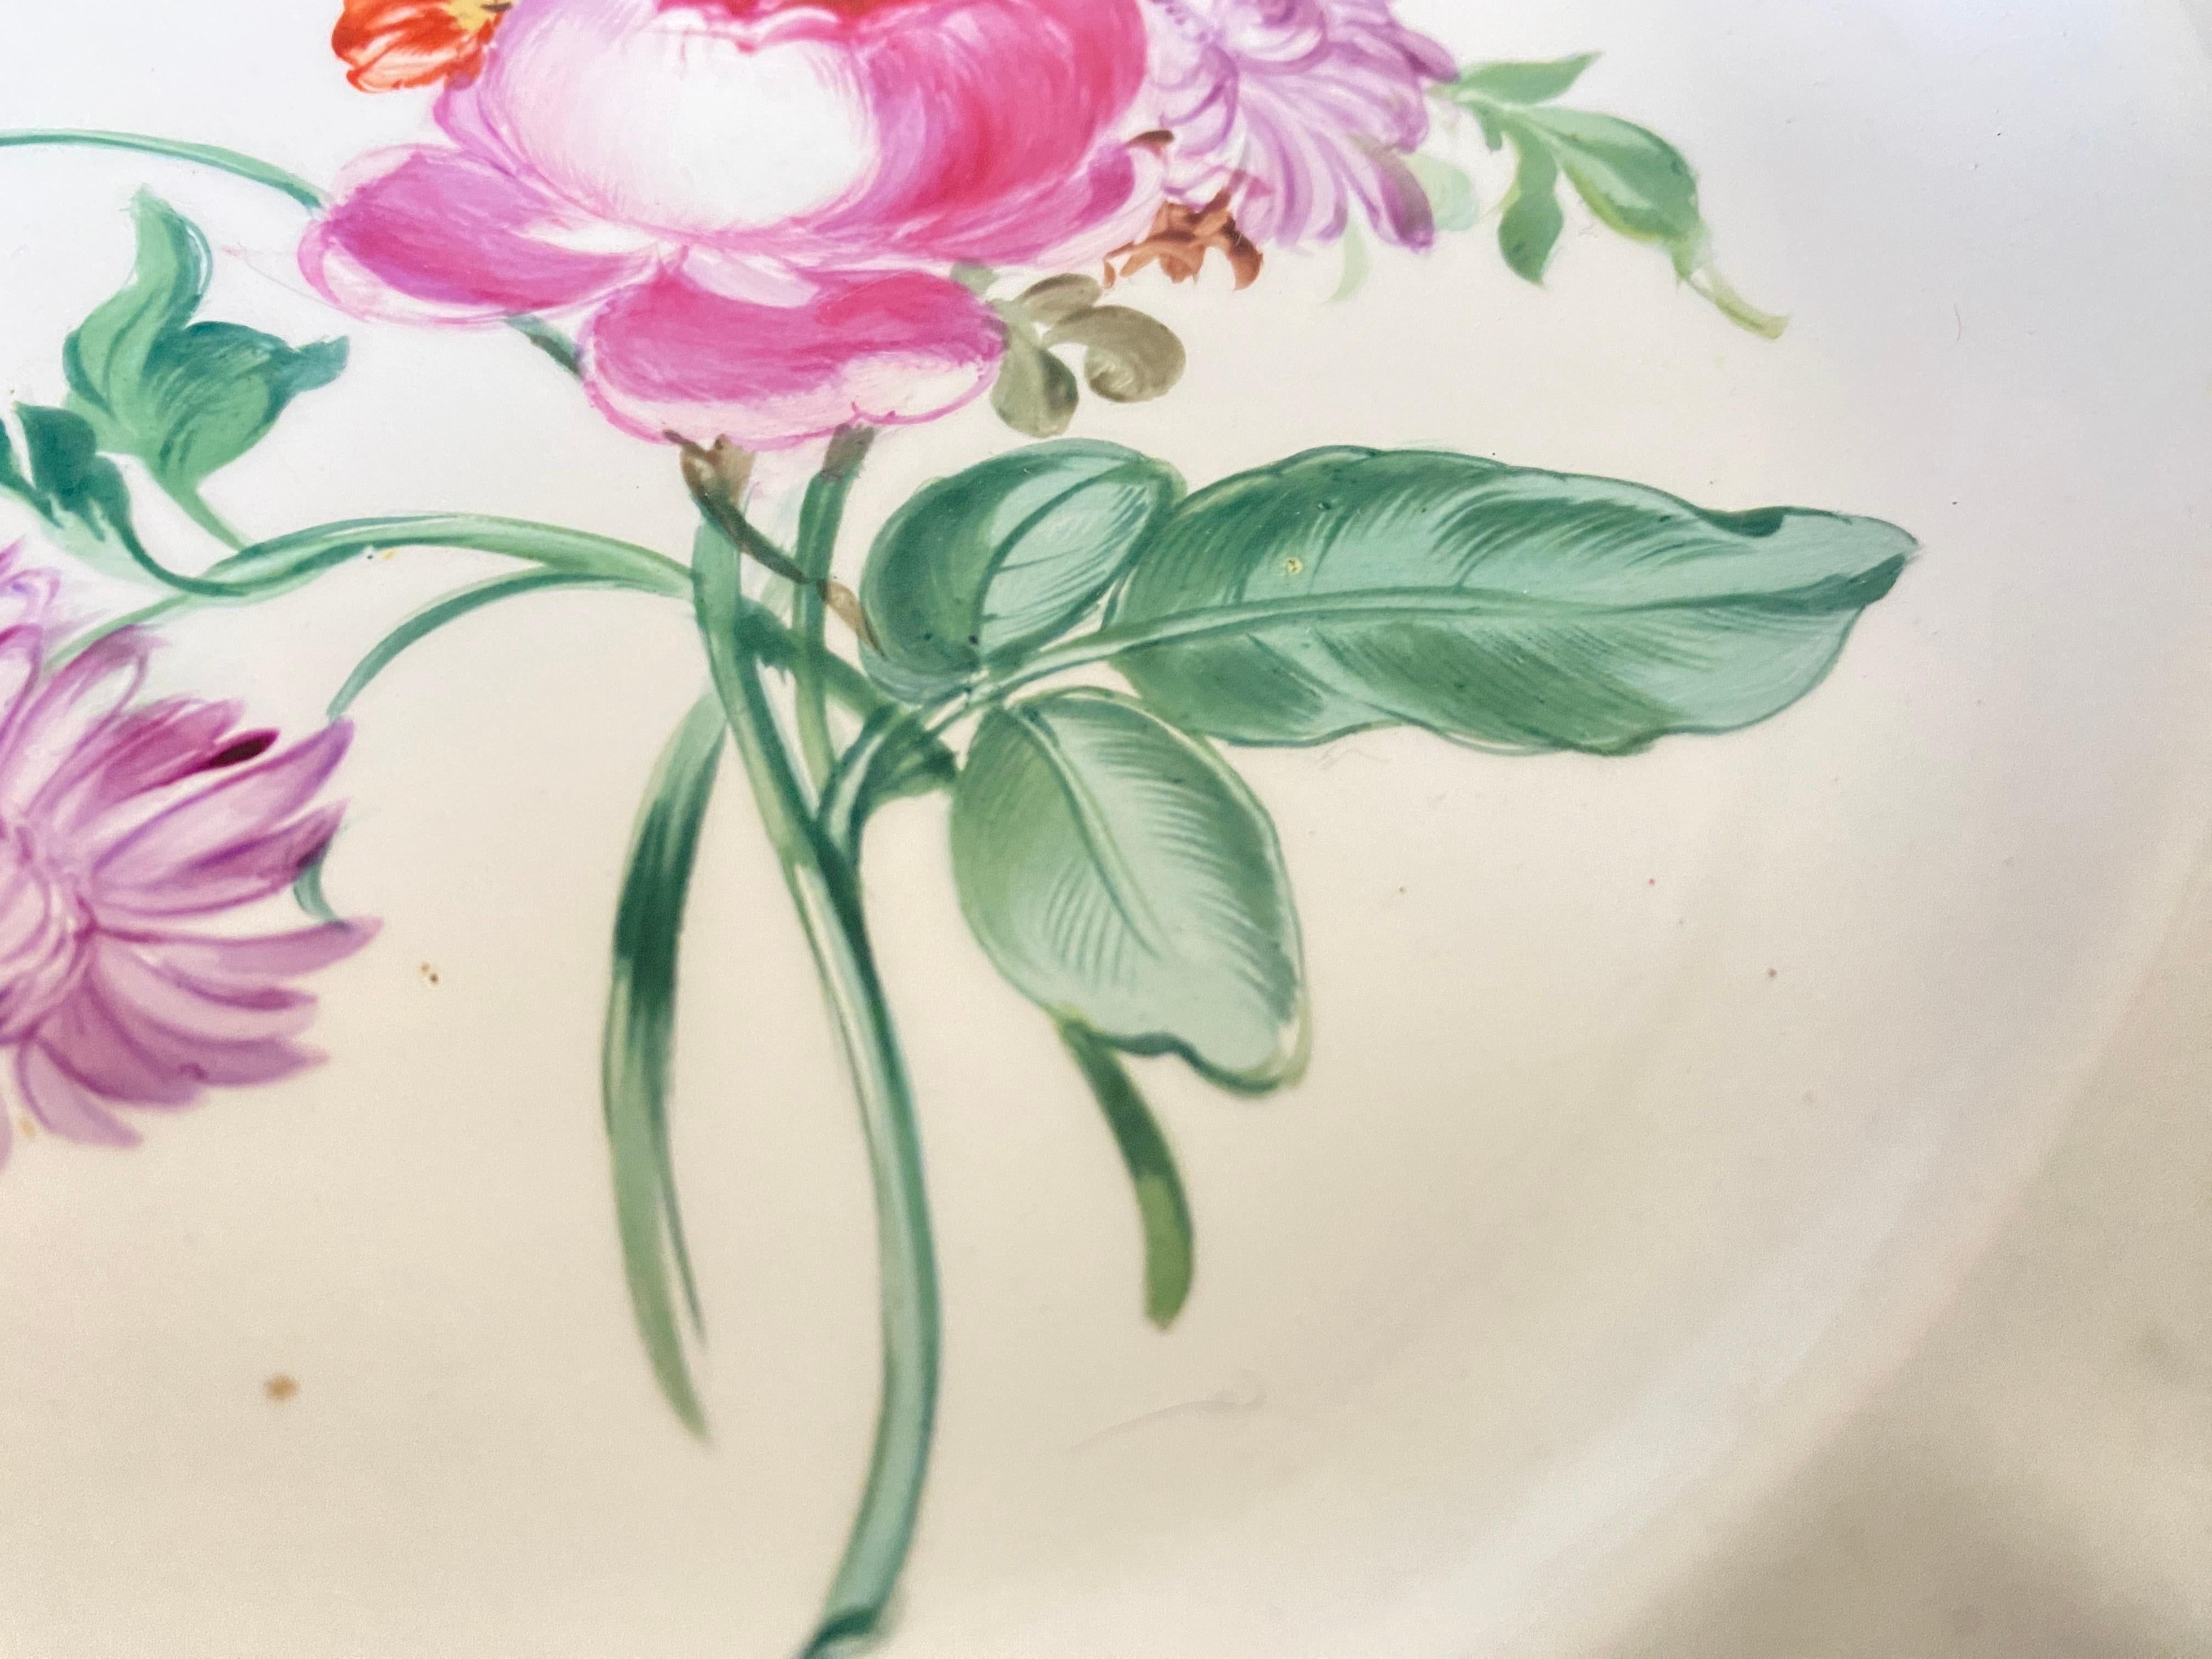 French Provincial Faience Dish, by Luneville, with Flowers Decor France 19th Century, Signed For Sale